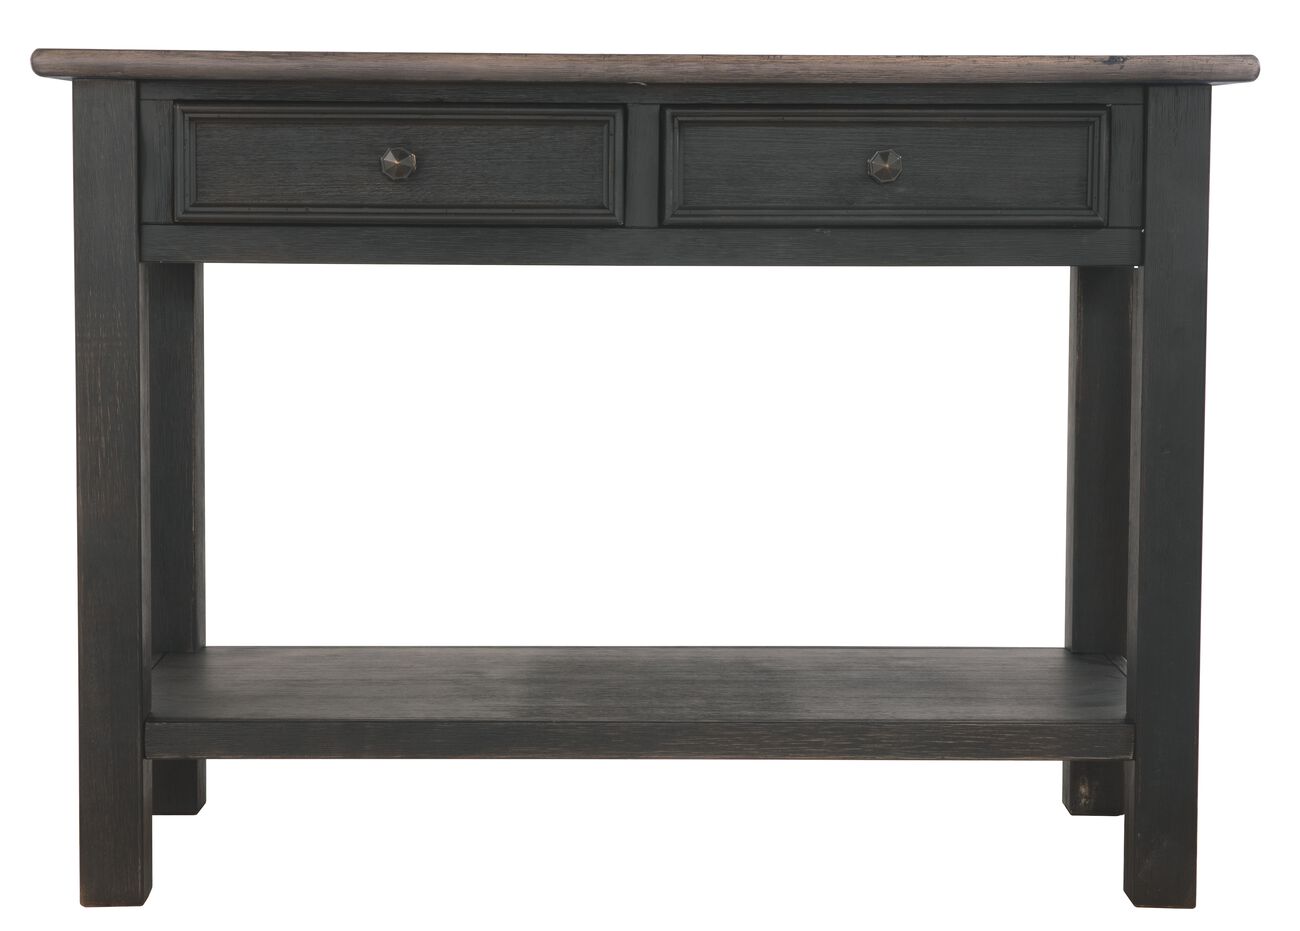 Wooden Sofa Table with 2 Drawers and Bottom Shelf, Brown and Black